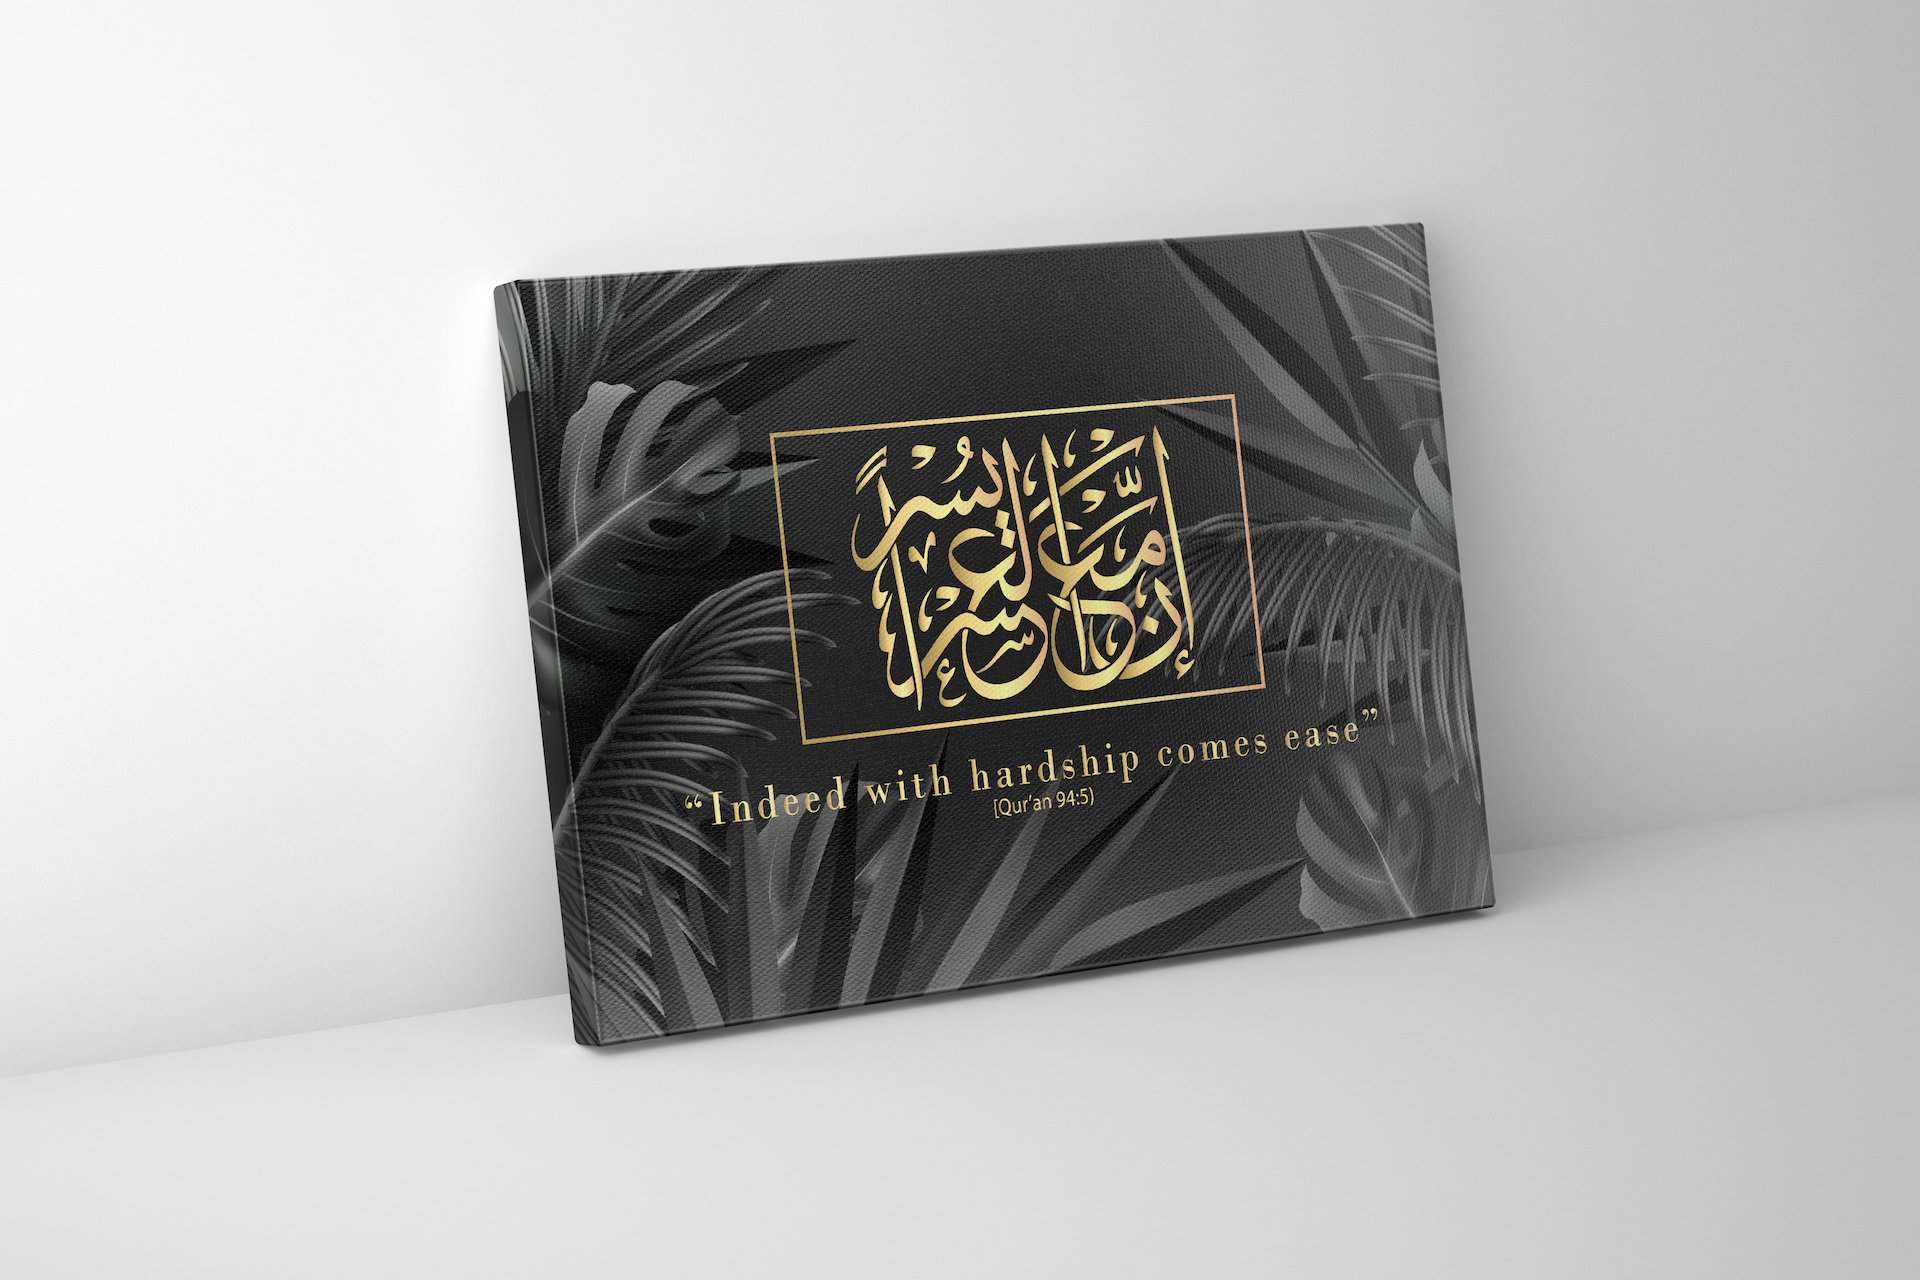 "Indeed with Hardship comes ease" Black Stretched Canvas Arabic Calligraphy Islamic Canvas Art - Peaceful Arts UK